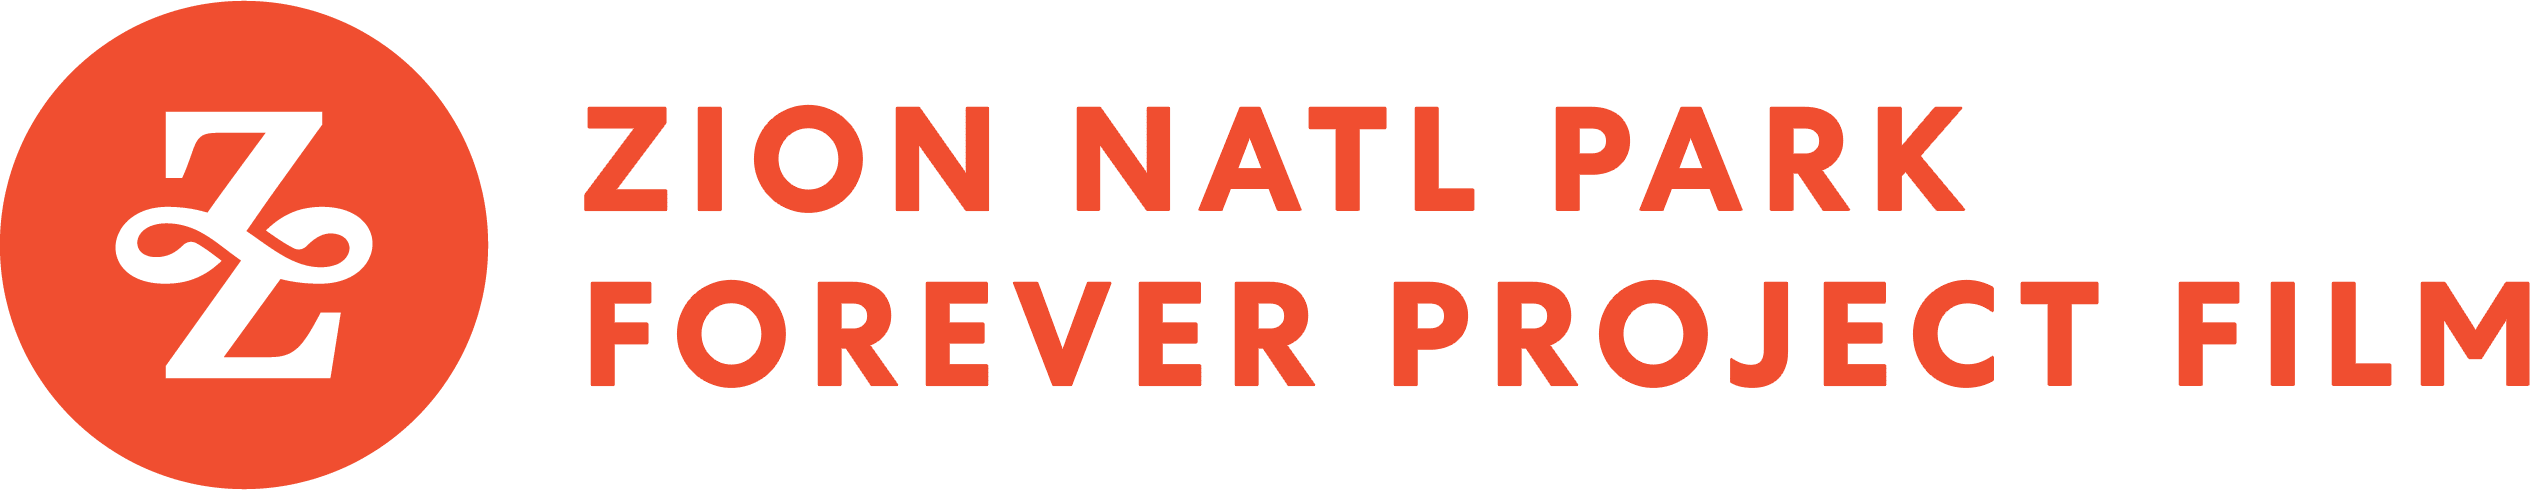 Zion National Park Forever Project Film